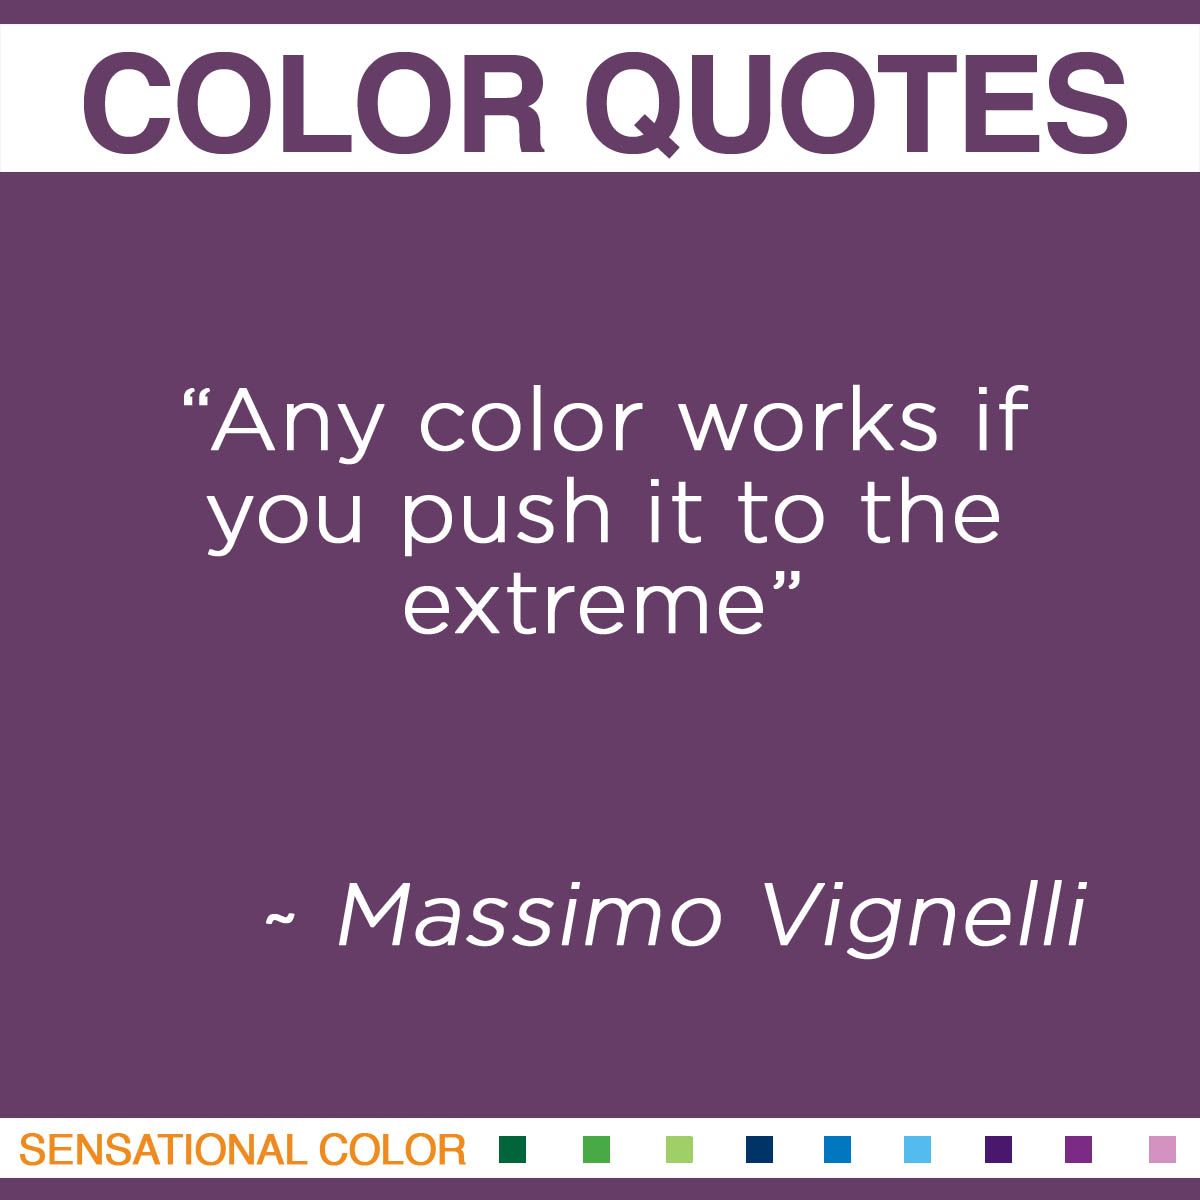 “Any color works if you push it to the extreme.” - Massimo Vignelli